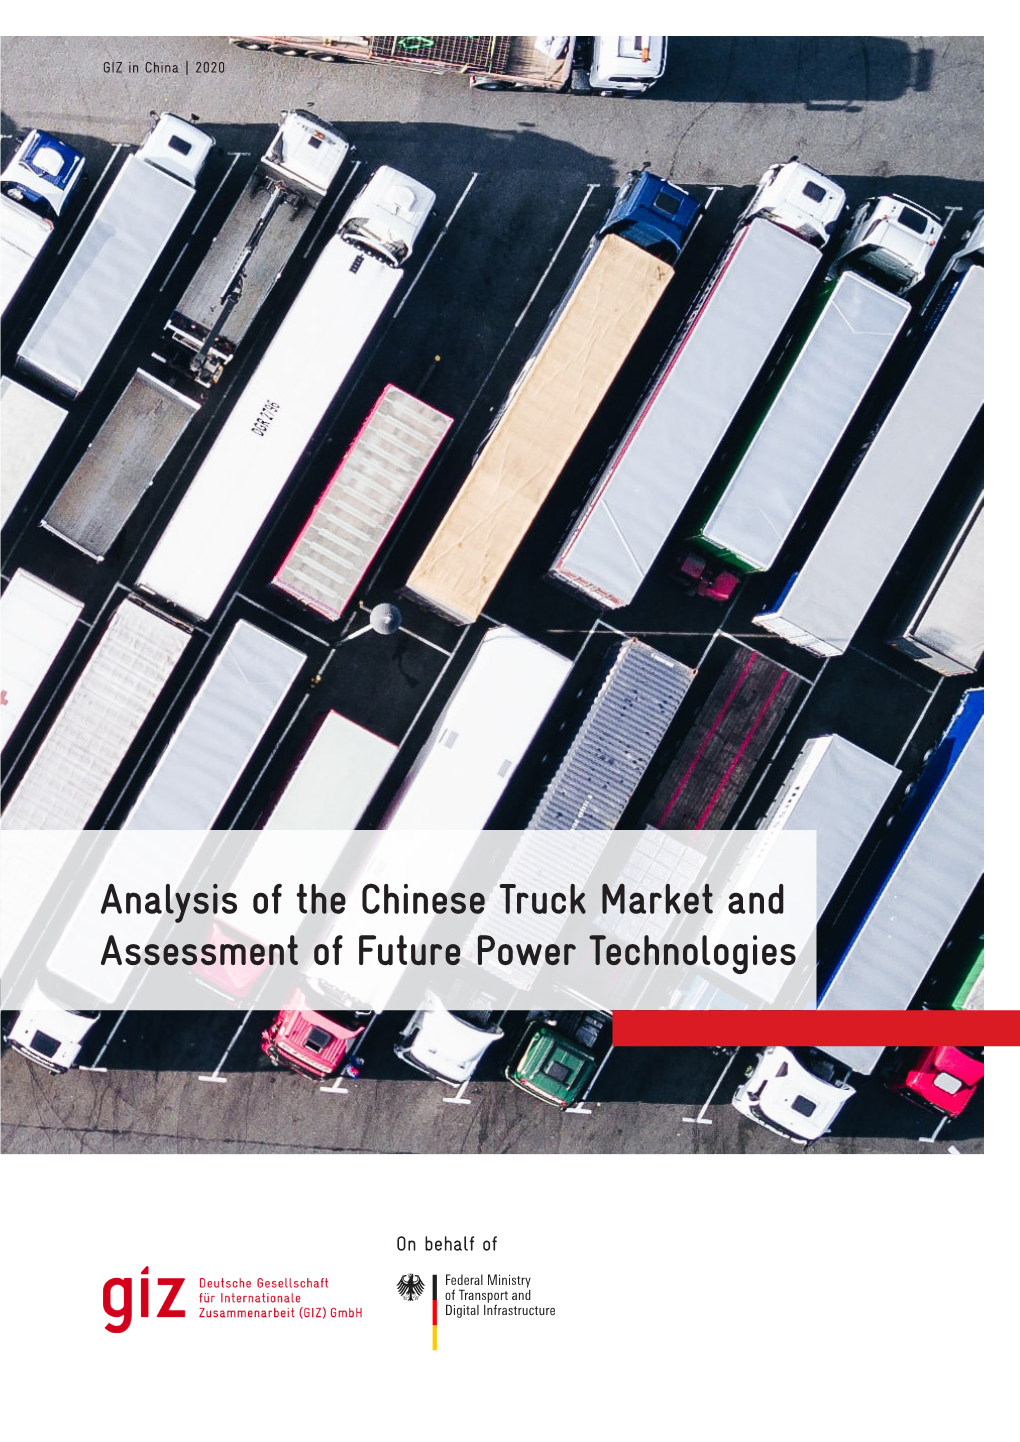 Analysis of the Chinese Truck Market and Assessment of Future Power Technologies